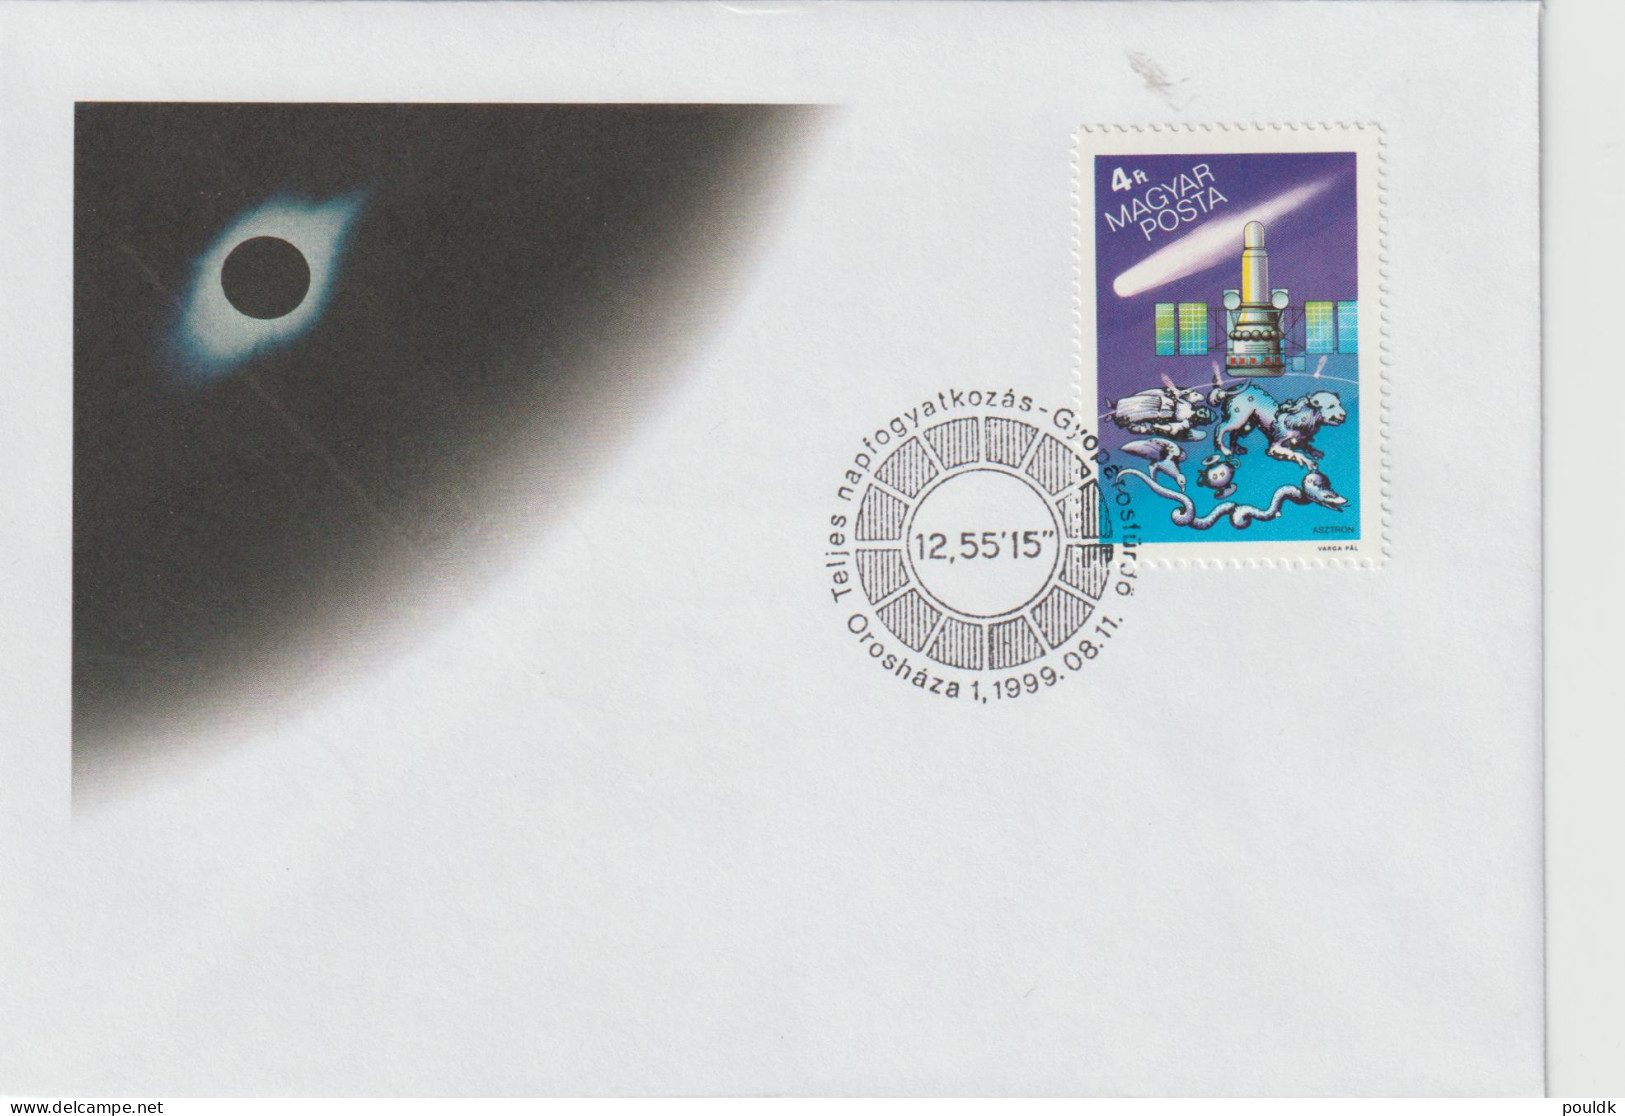 Solar Eclipse 1999 - Commemorative Cover From Hungary 11.8.1999. Postal Weight 0,04 Kg. Please Read Sales Conditions - Natur